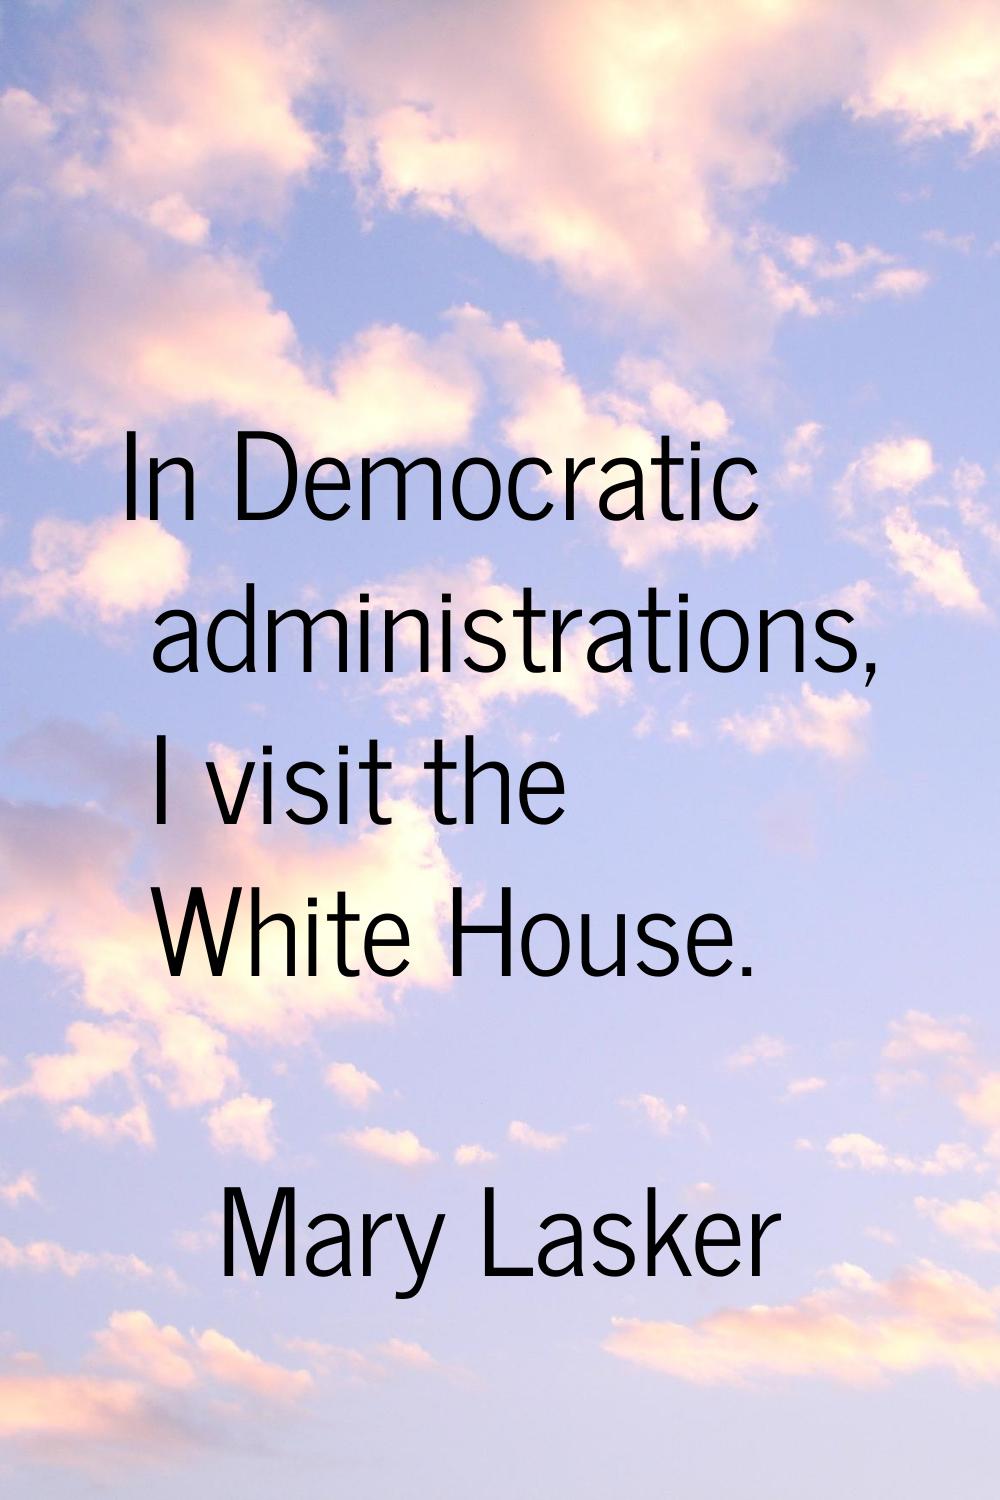 In Democratic administrations, I visit the White House.